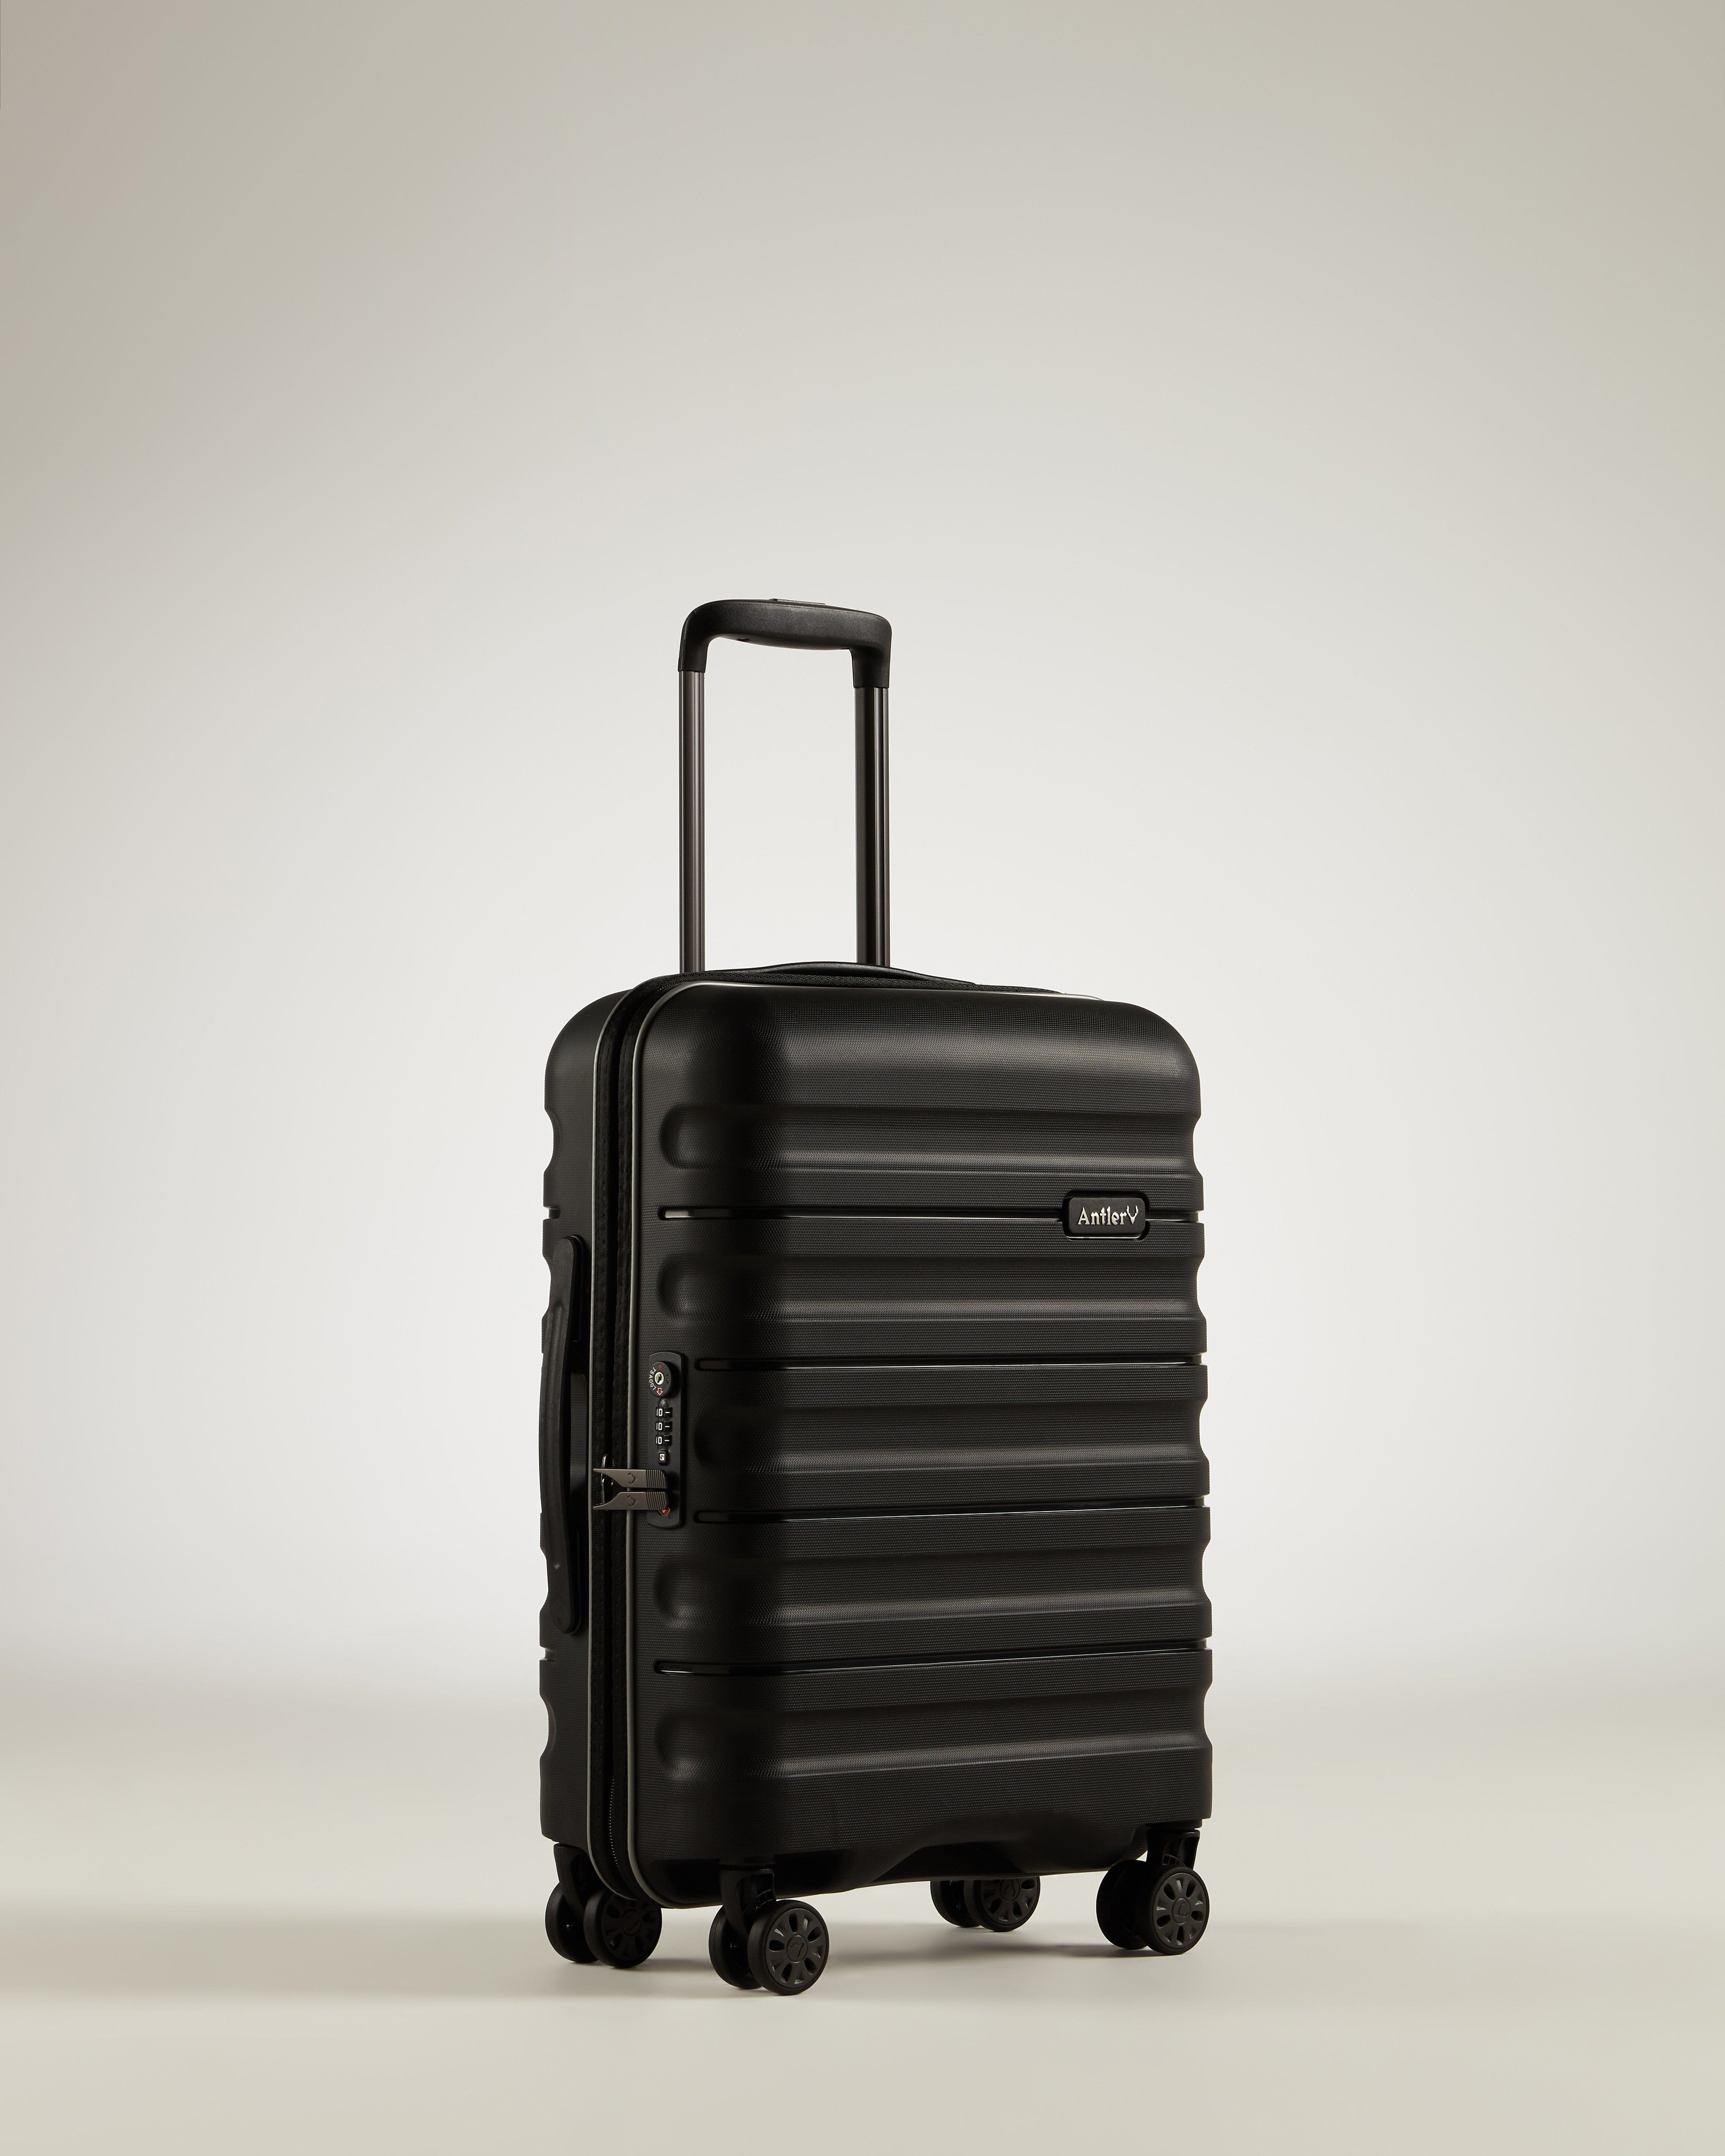 View Antler Lincoln Cabin Suitcase In Black Size 56 x 35 x 23 cm information